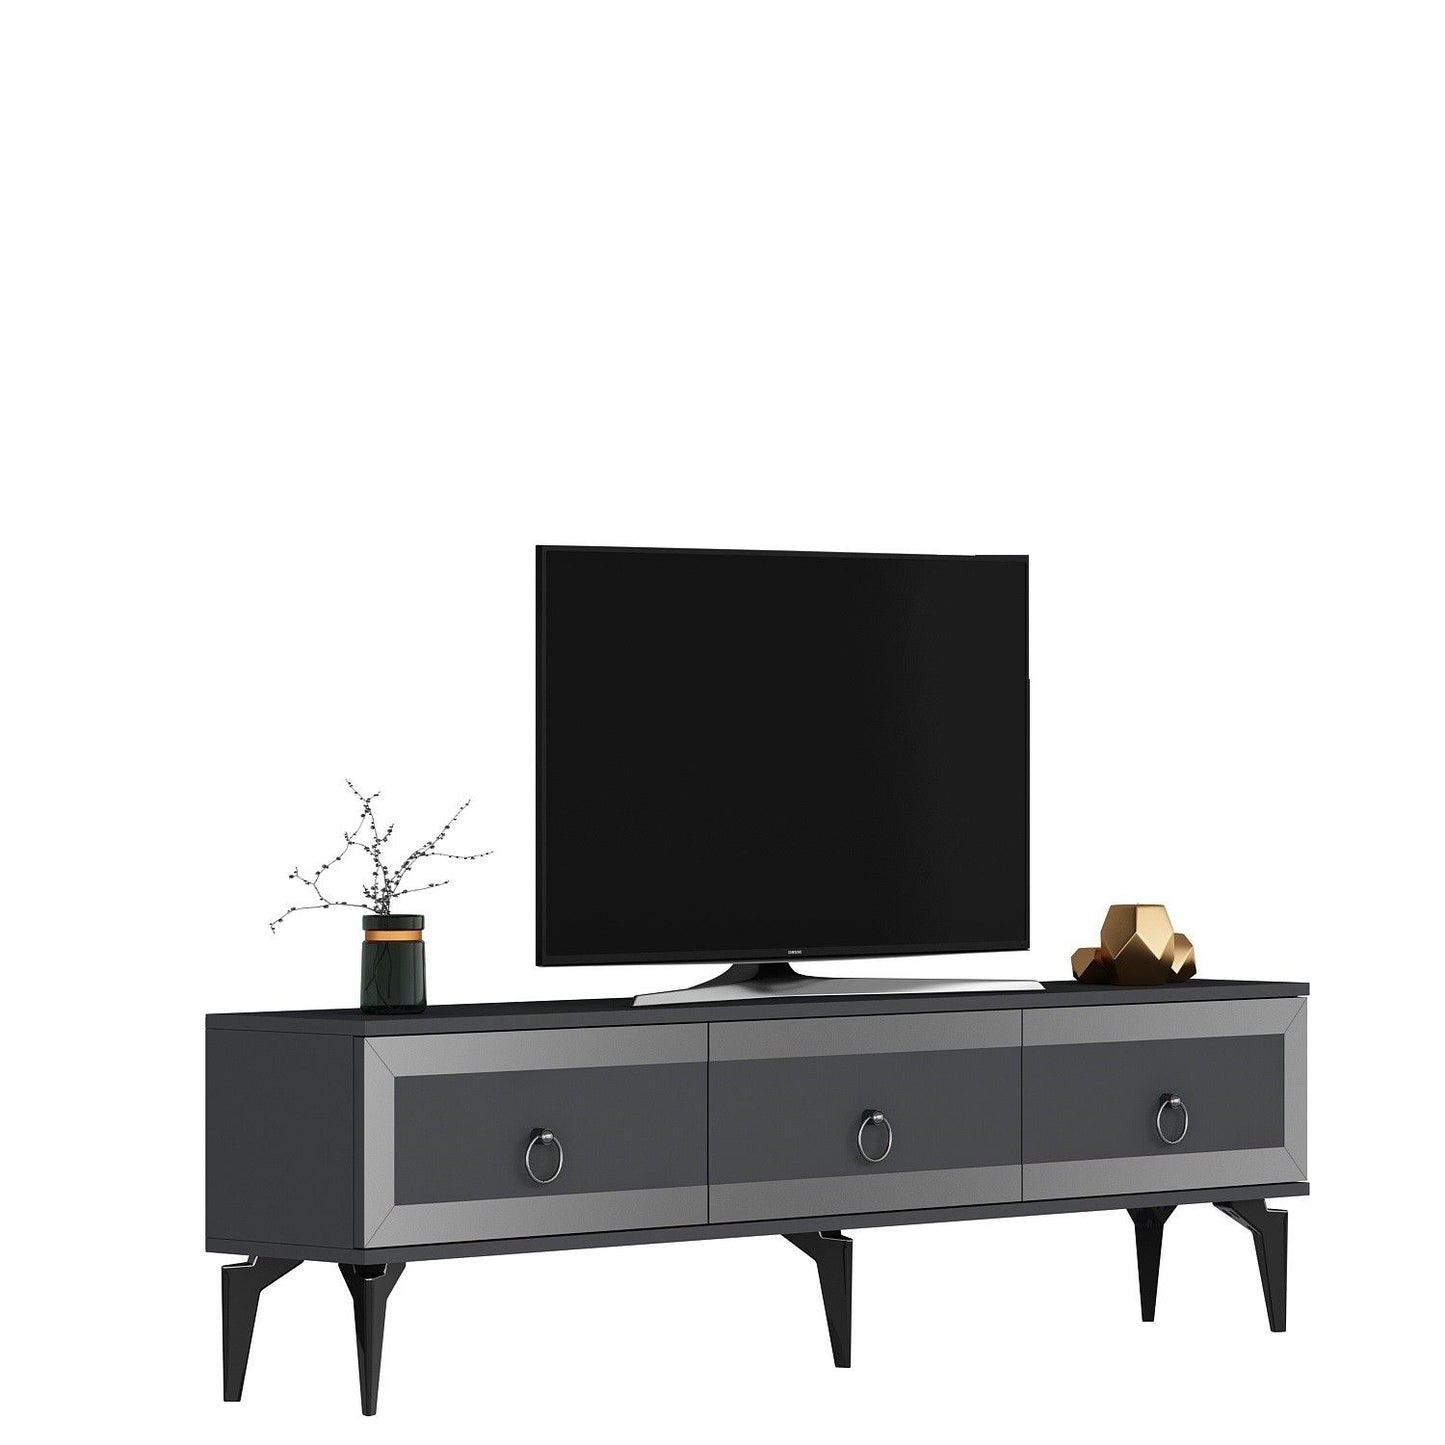 Ponny - Anthracite, Silver - TV Stand